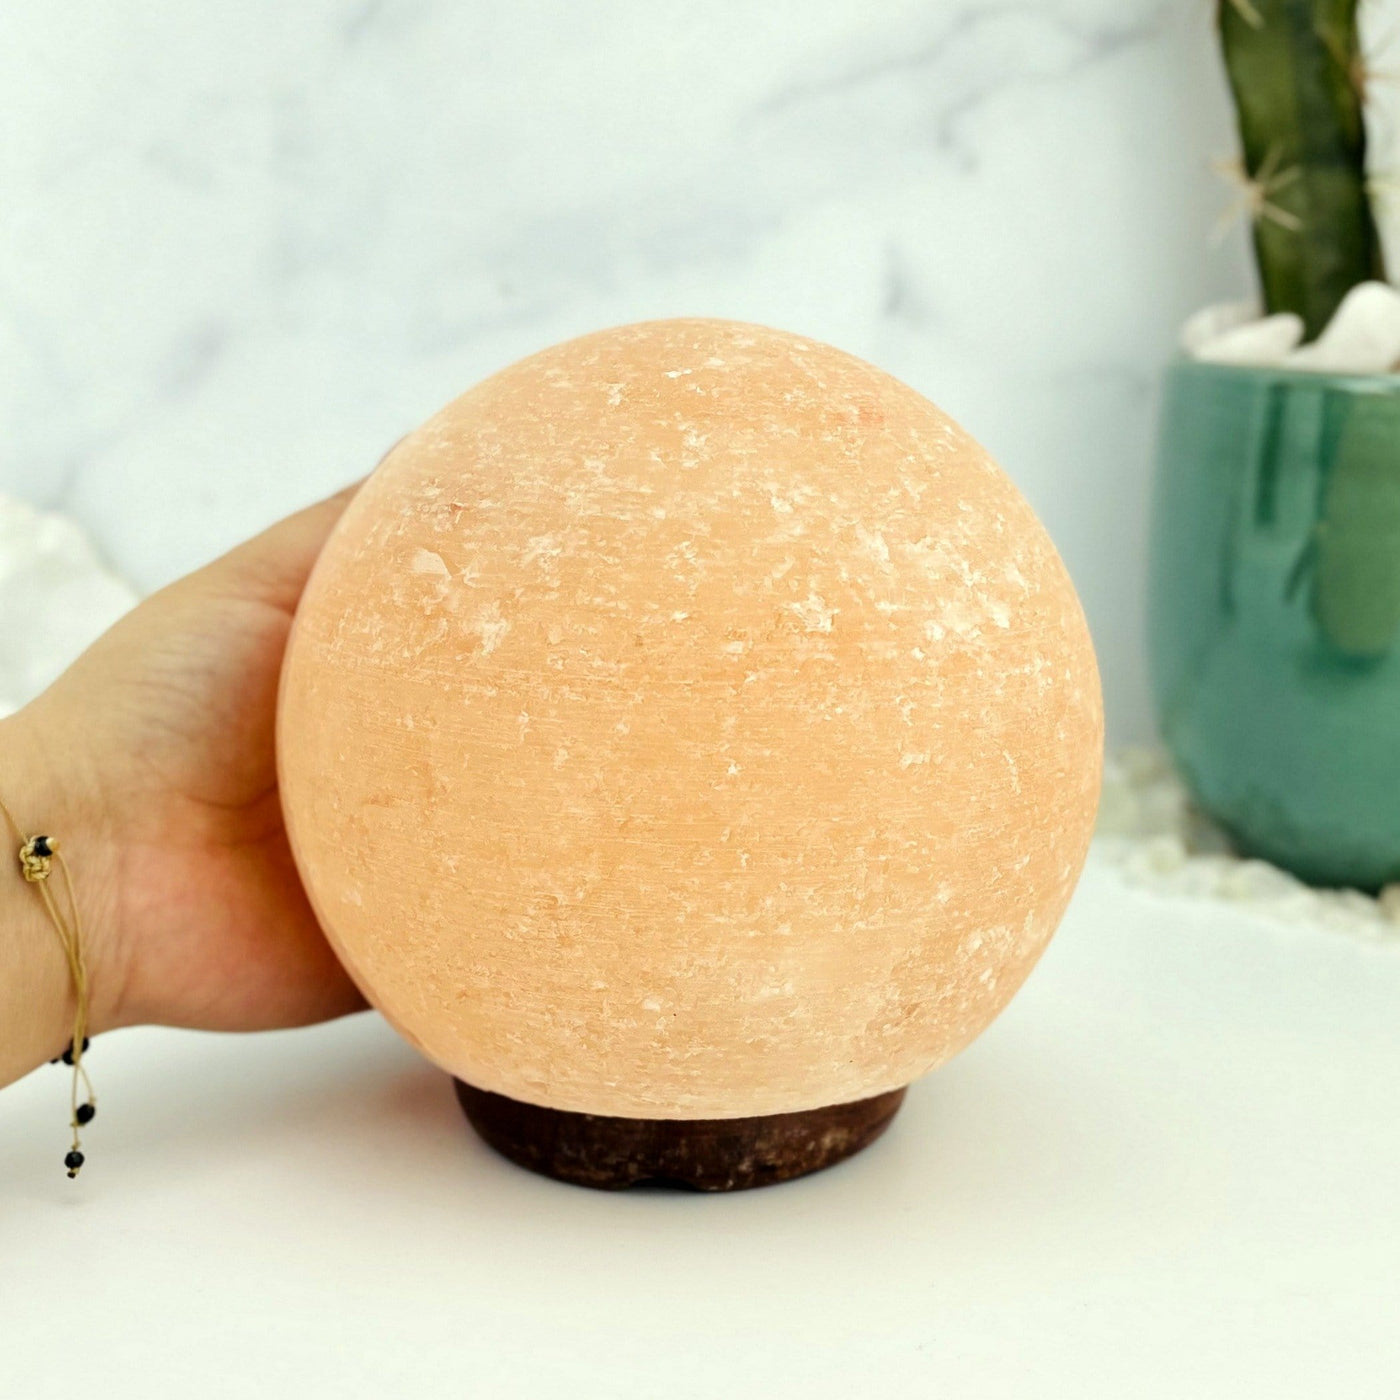 Himalayan Salt Lamp sphere with a hand by it